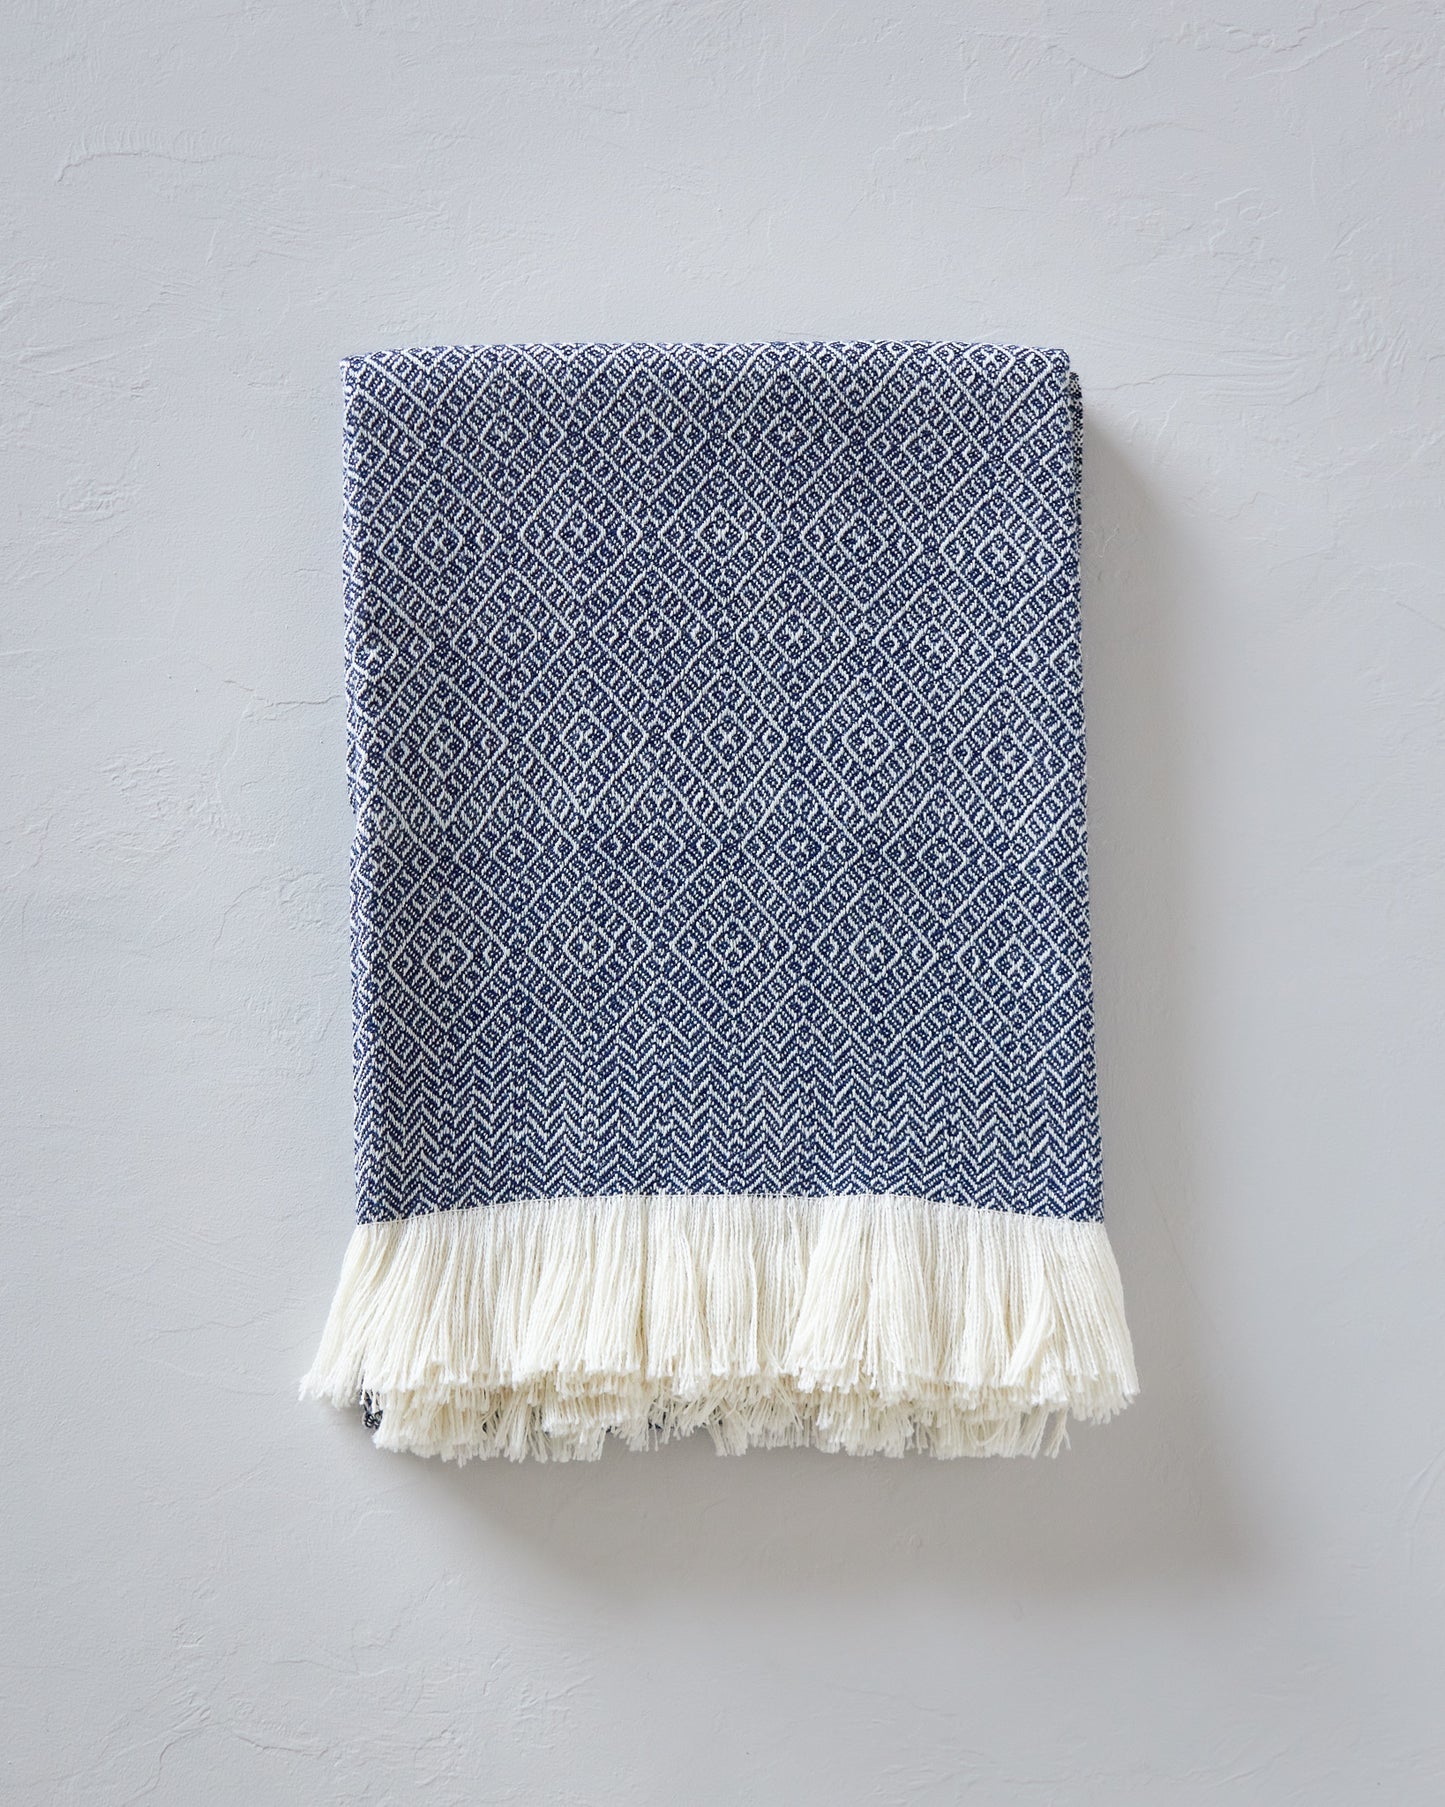 
                  
                    Folded Pacifica navy blue and white luxury baby alpaca throw blanket gift handwoven and hypoallergenic.
                  
                